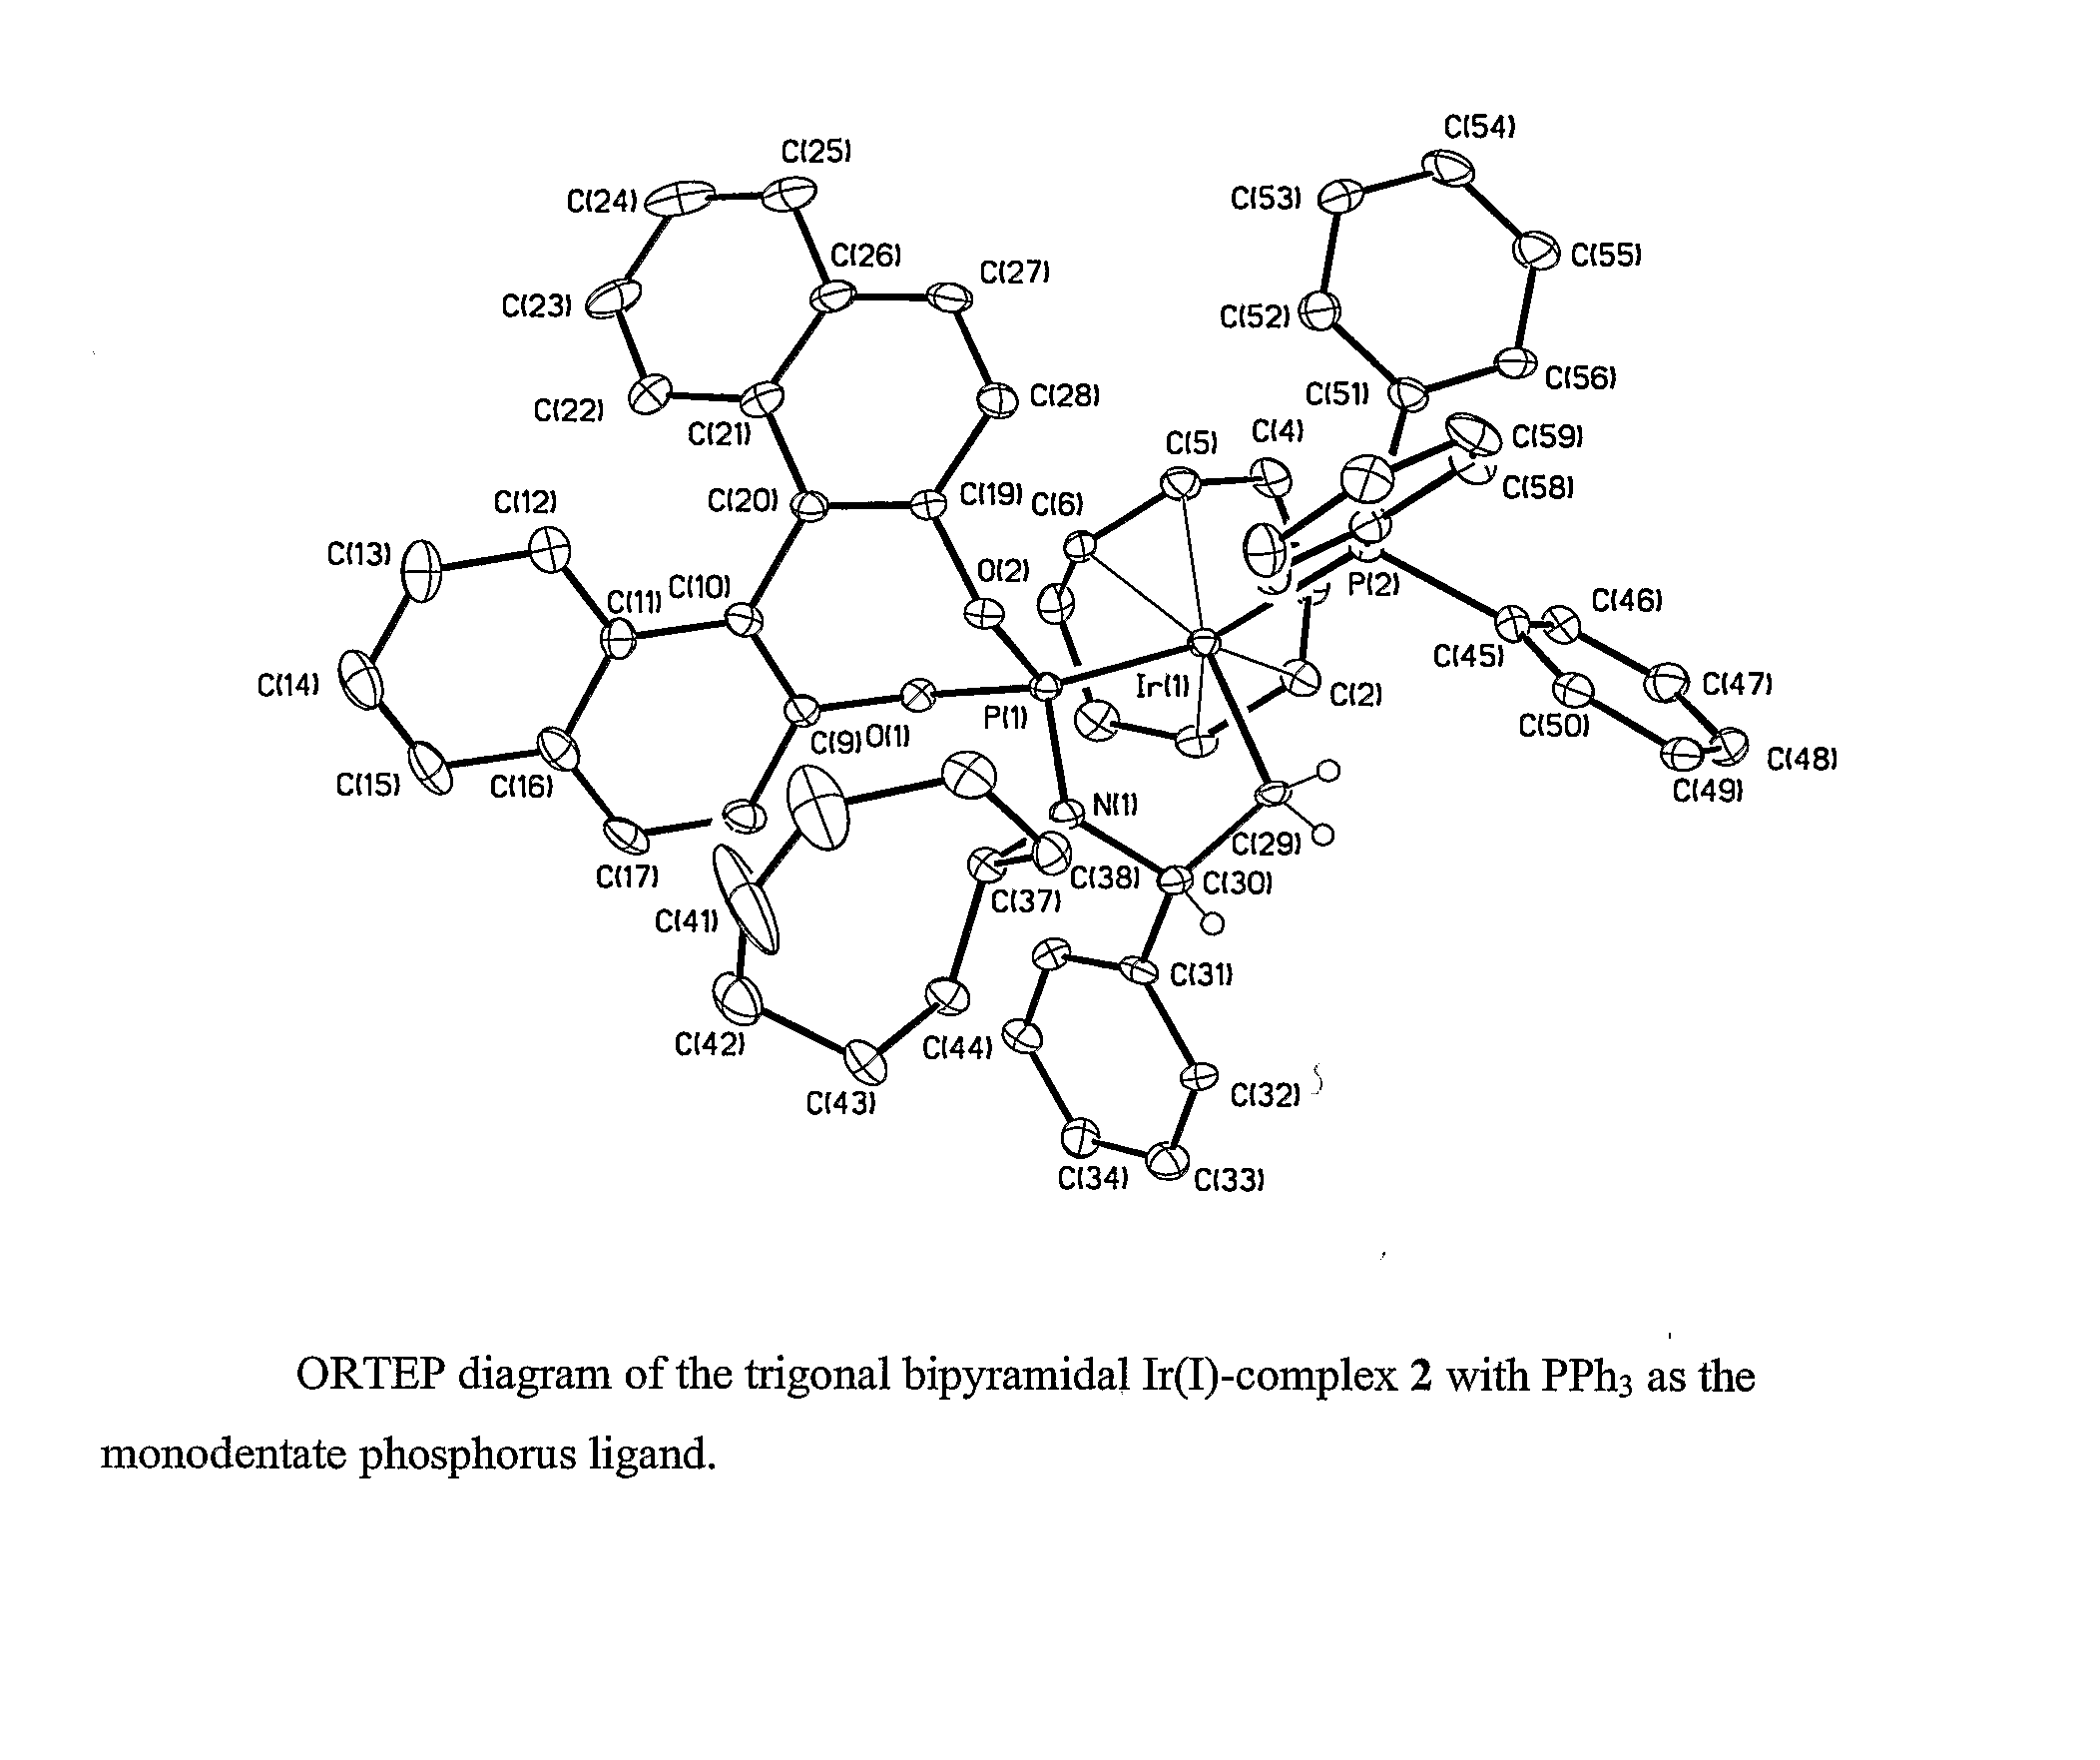 Enantioselective Phosphoramidite Compounds and Catalysts